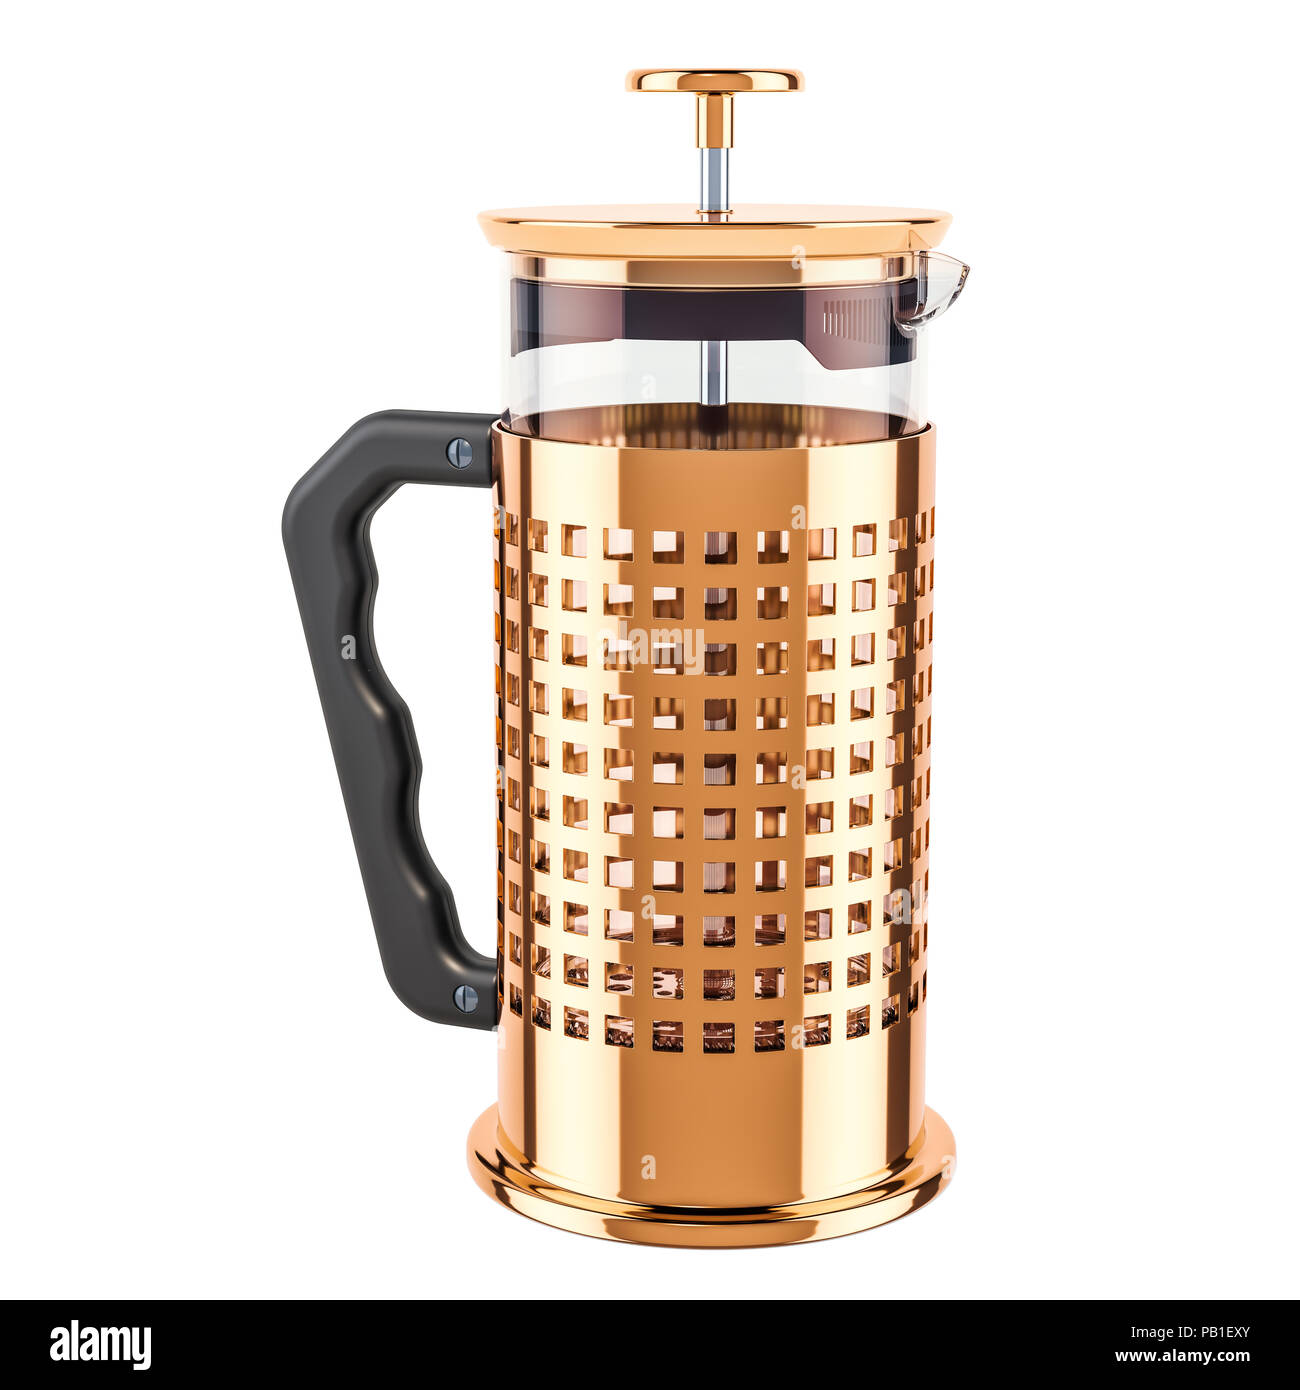 Golden French Press Coffee or Tea Maker, 3D rendering isolated on white background Stock Photo